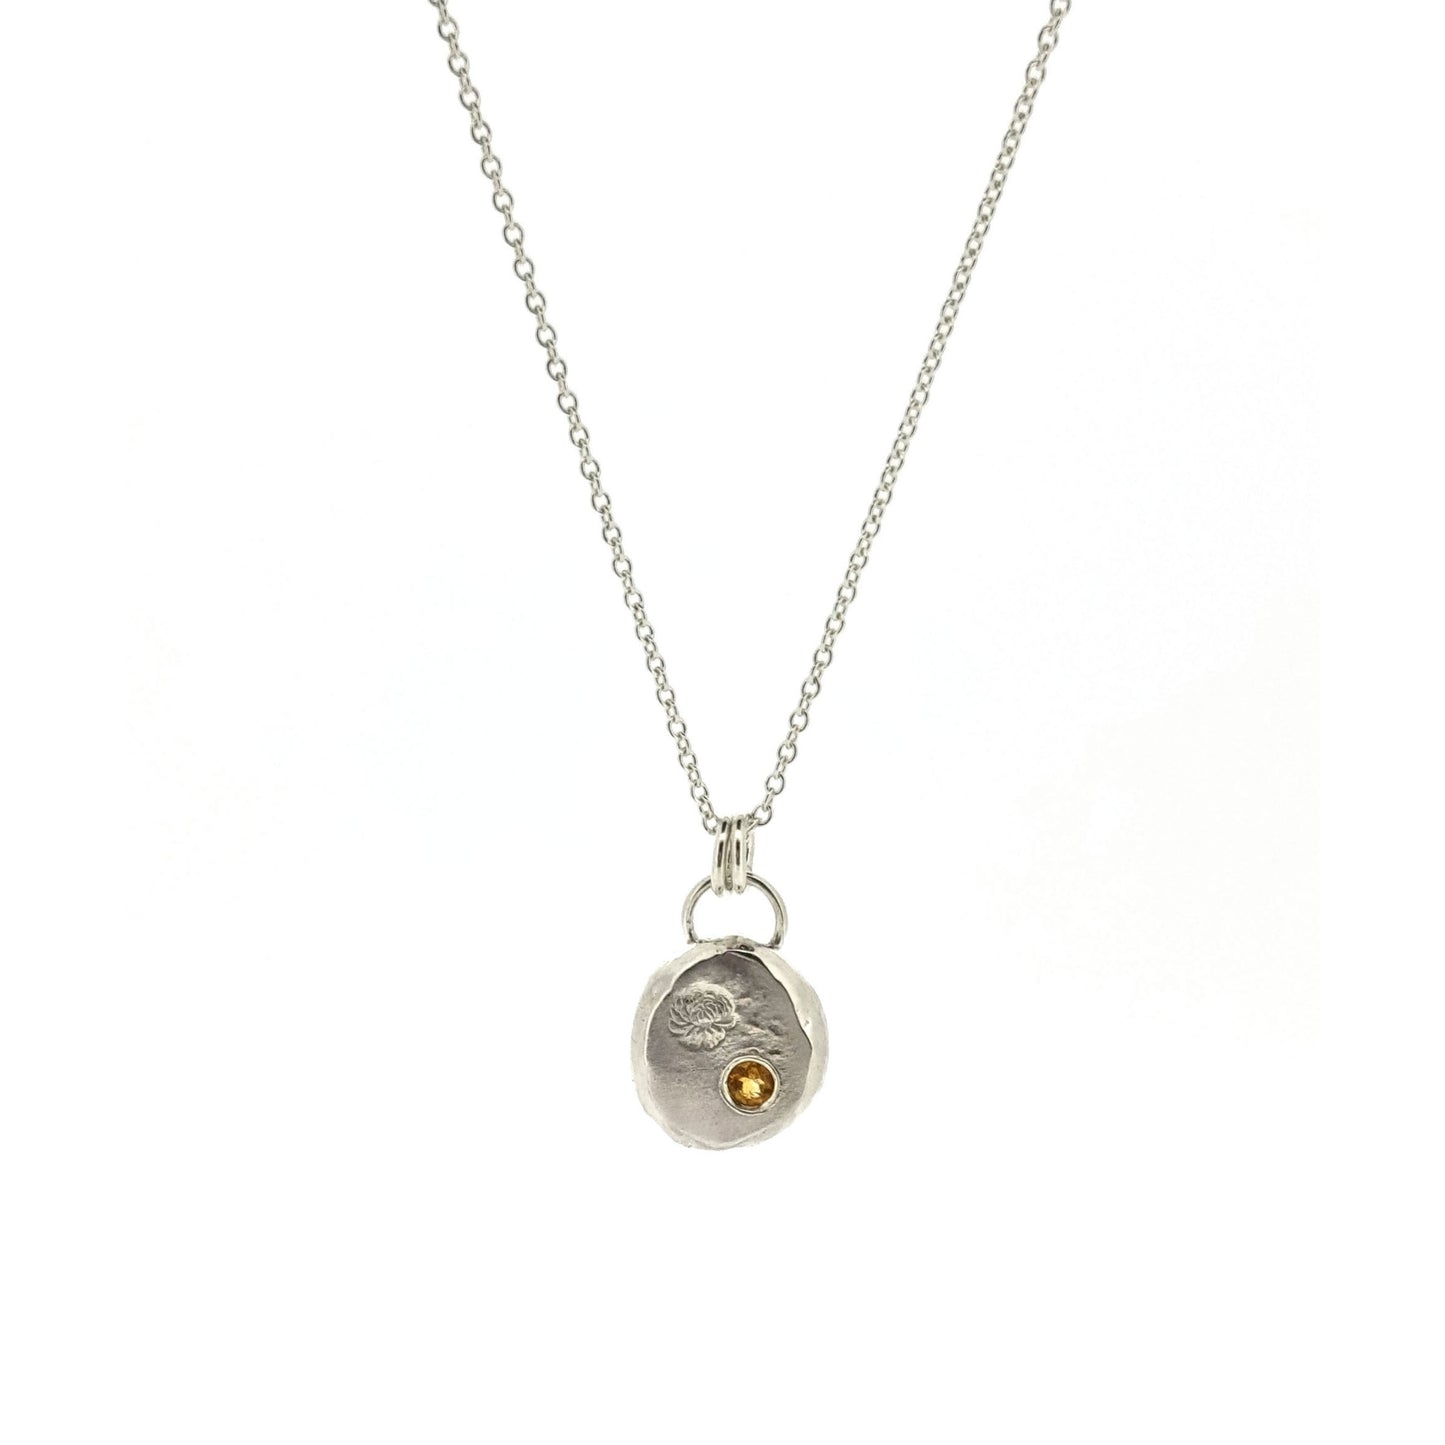 Round silver flat pebble pendant with chrysanthemum flower engraved on it and a flush set yellow citrine gemstone. On a silver chain.